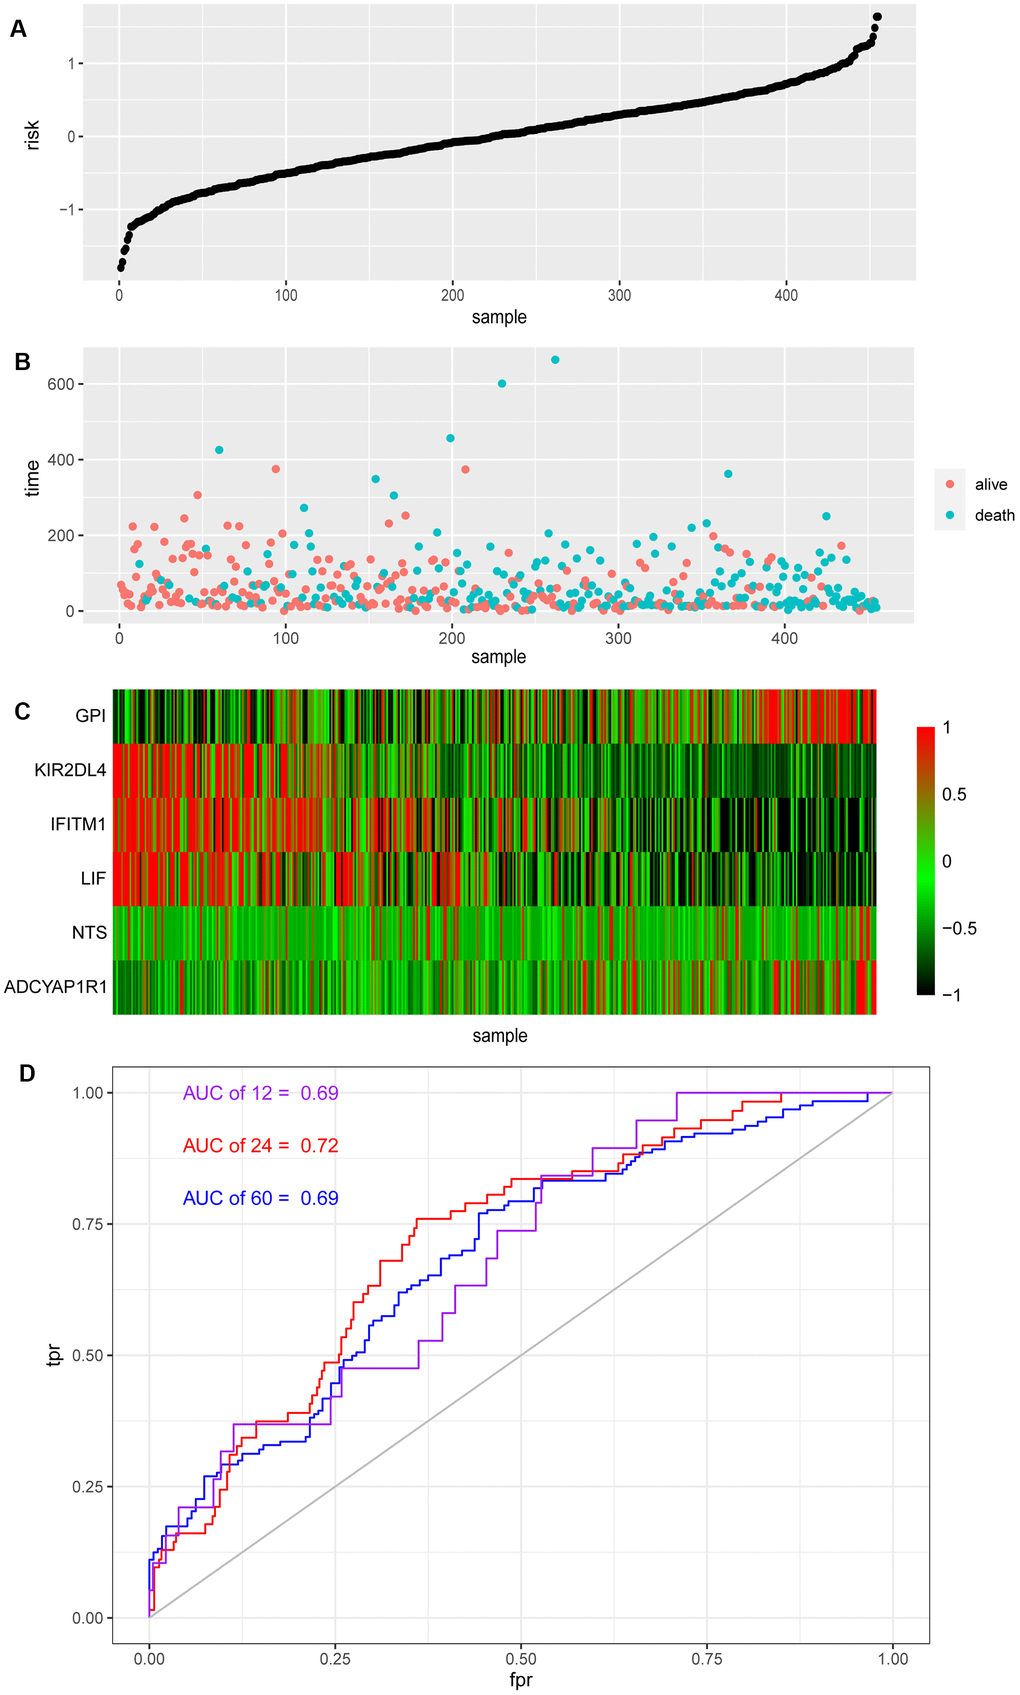 Risk score and ROC curve of melanoma. (A) Risk score of melanoma patients distributed in ascending order. (B) Survival time and status of melanoma patients in order of increasing risk score. The red dots represent the surviving patients and the blue dots represent dead. (C) The heatmap shows the expression of these six biomarkers in melanoma in order of increasing risk scores. (D) The ROC curve for 1, 2, 5-year survival prediction with AUC value.